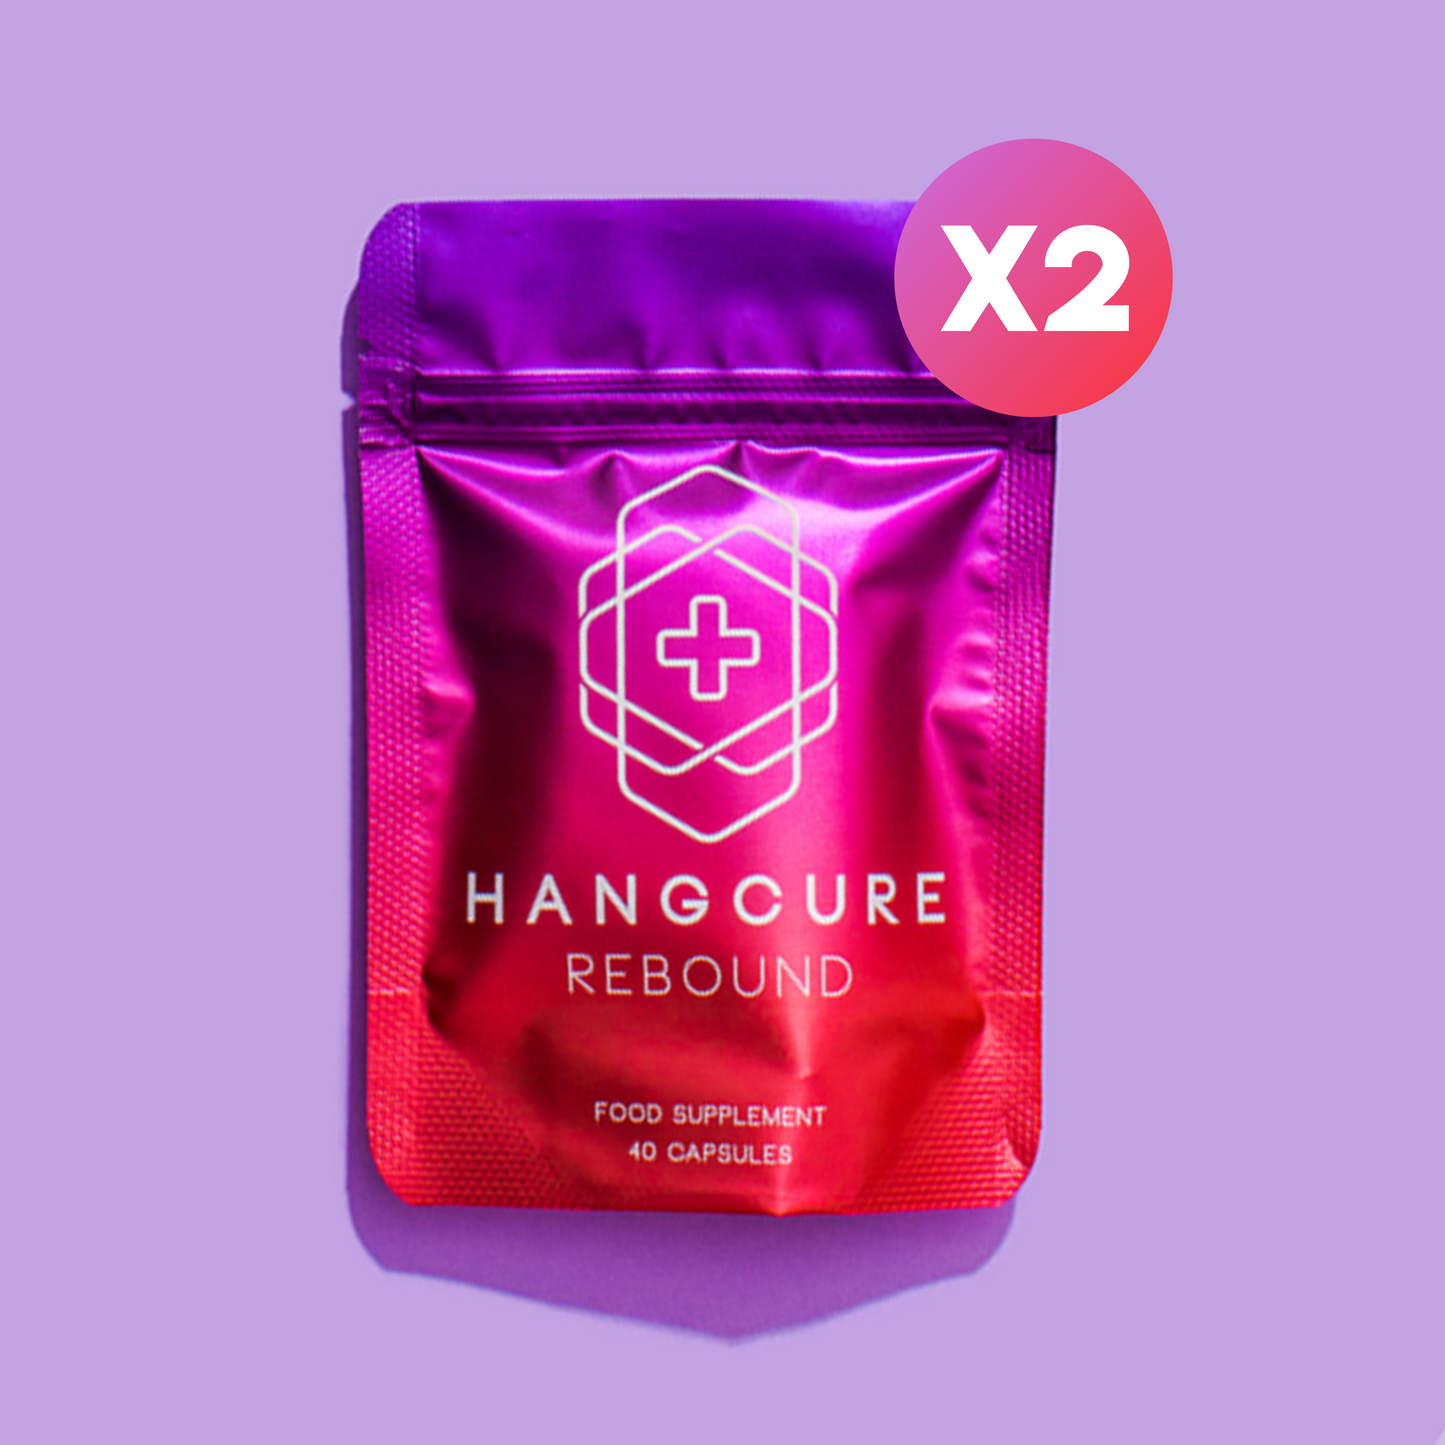 2x HANGCURE REBOUND + FREE SHIPPING